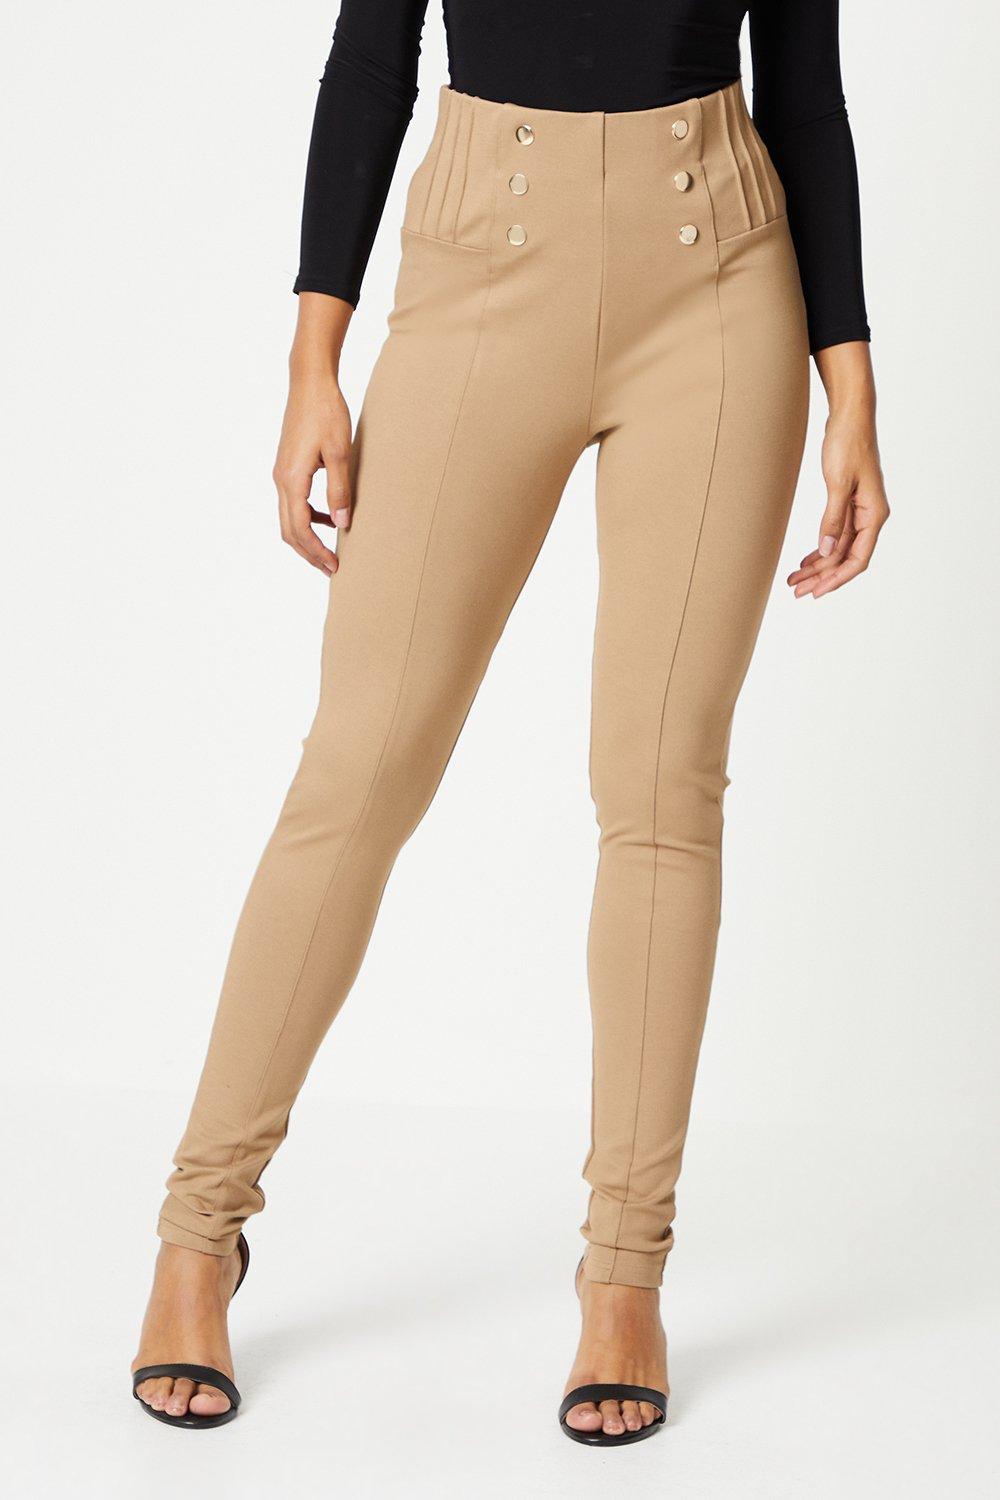 Women’s Tall Button Front Pleat Skinny Trouser - camel - 18